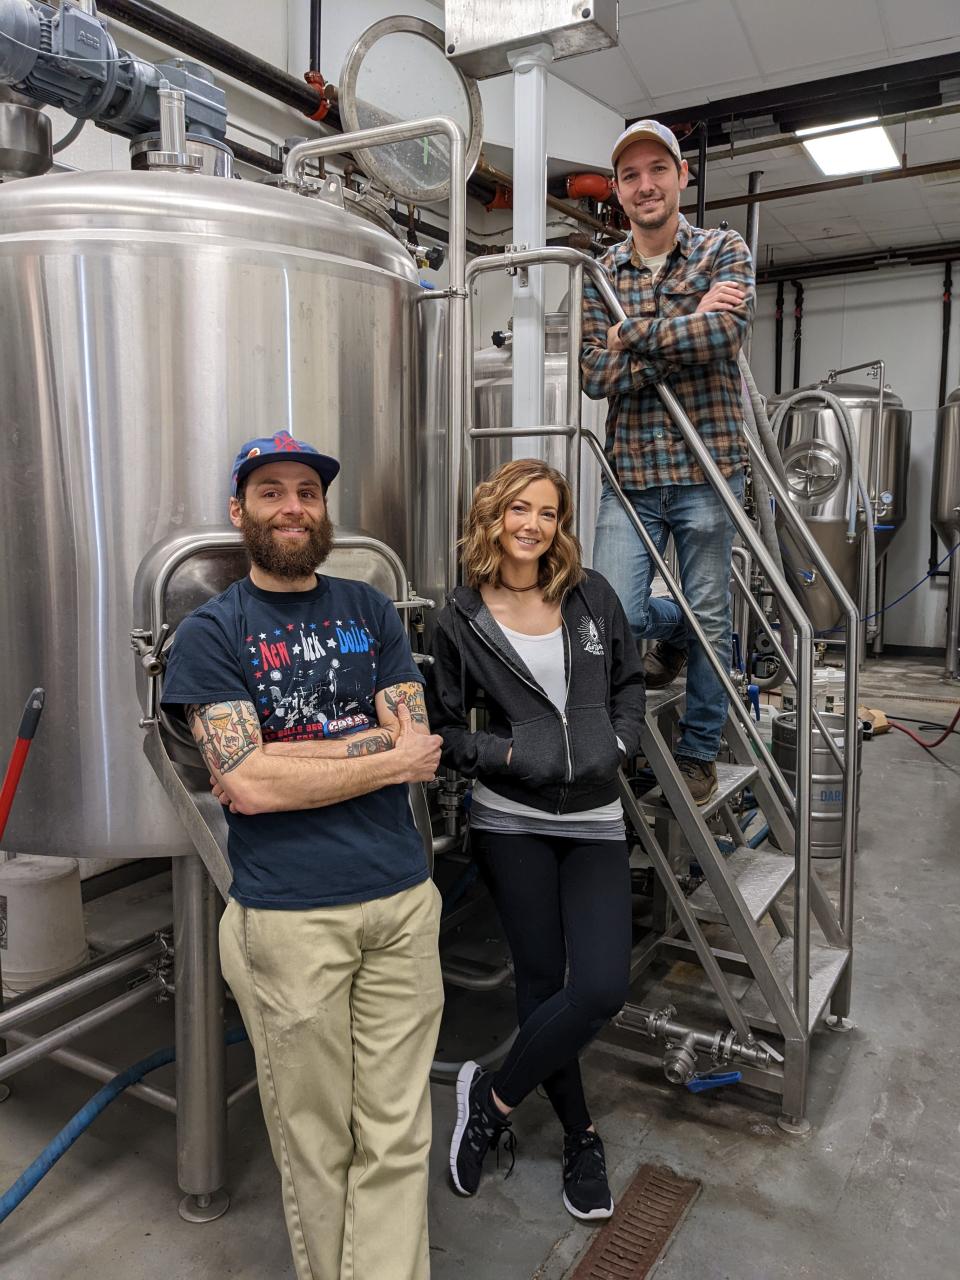 The owners of Wild Air Beerworks, set to open this summer (left to right: Nick Jiorle, Dani Roling, Bert Roling).